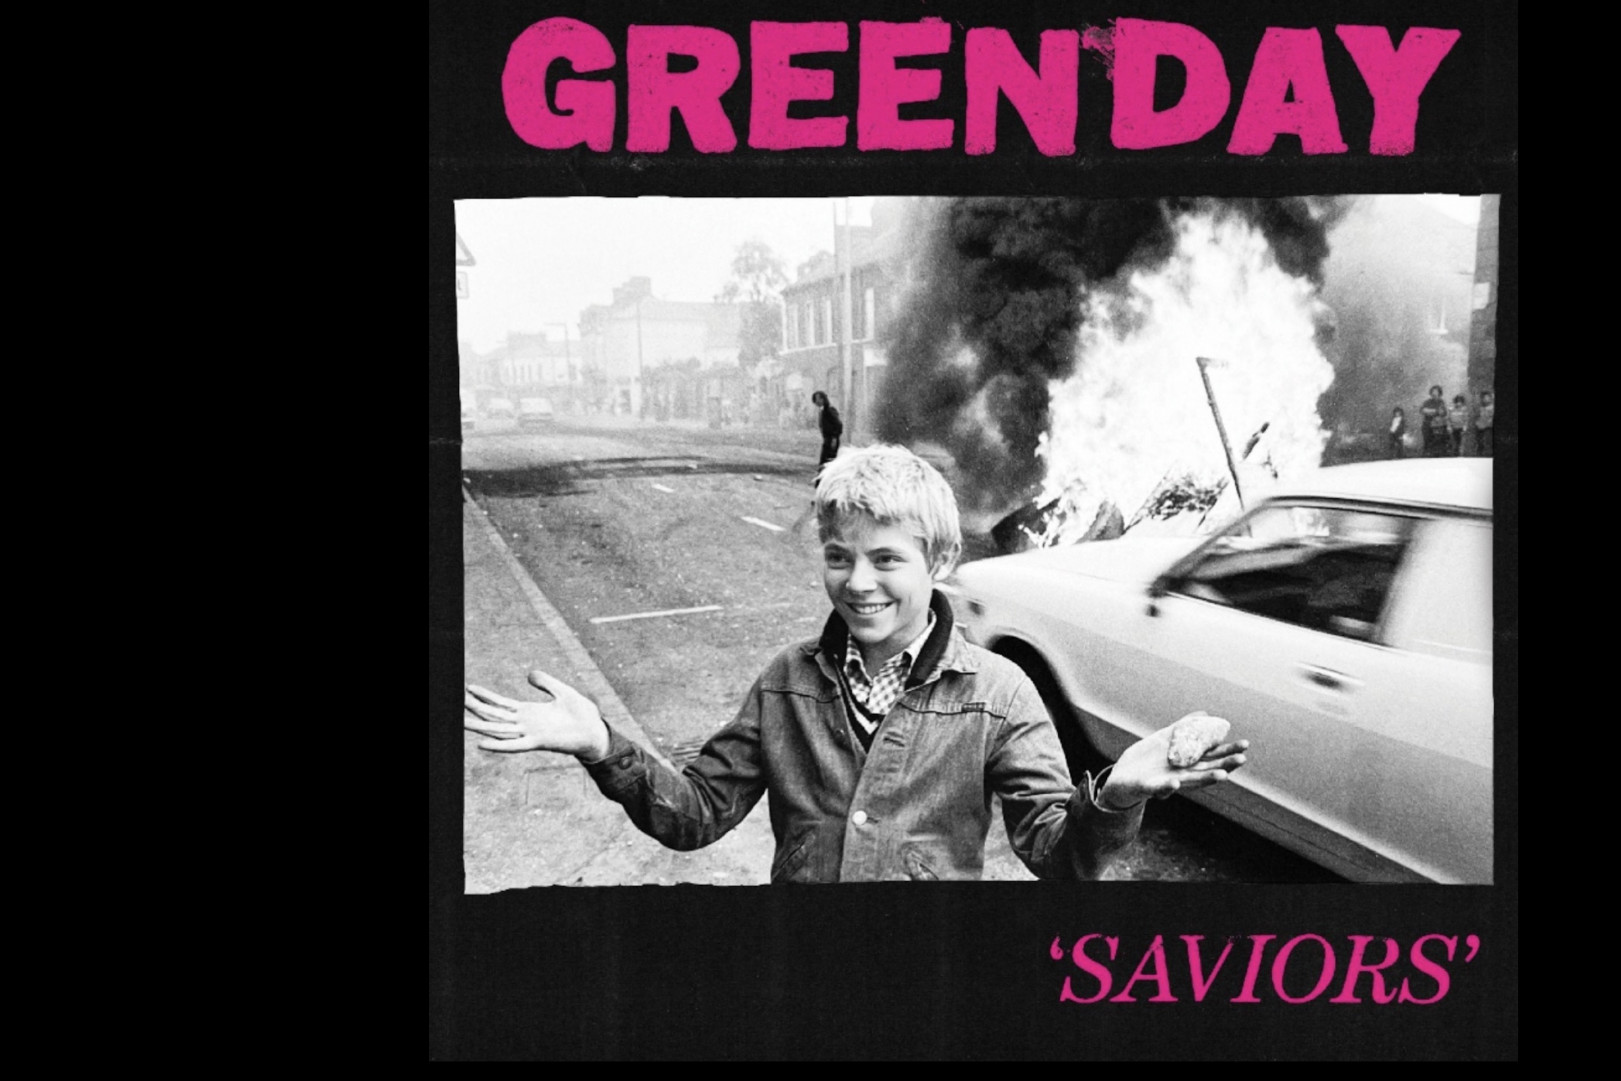 Green Day to release 'Saviors' in January